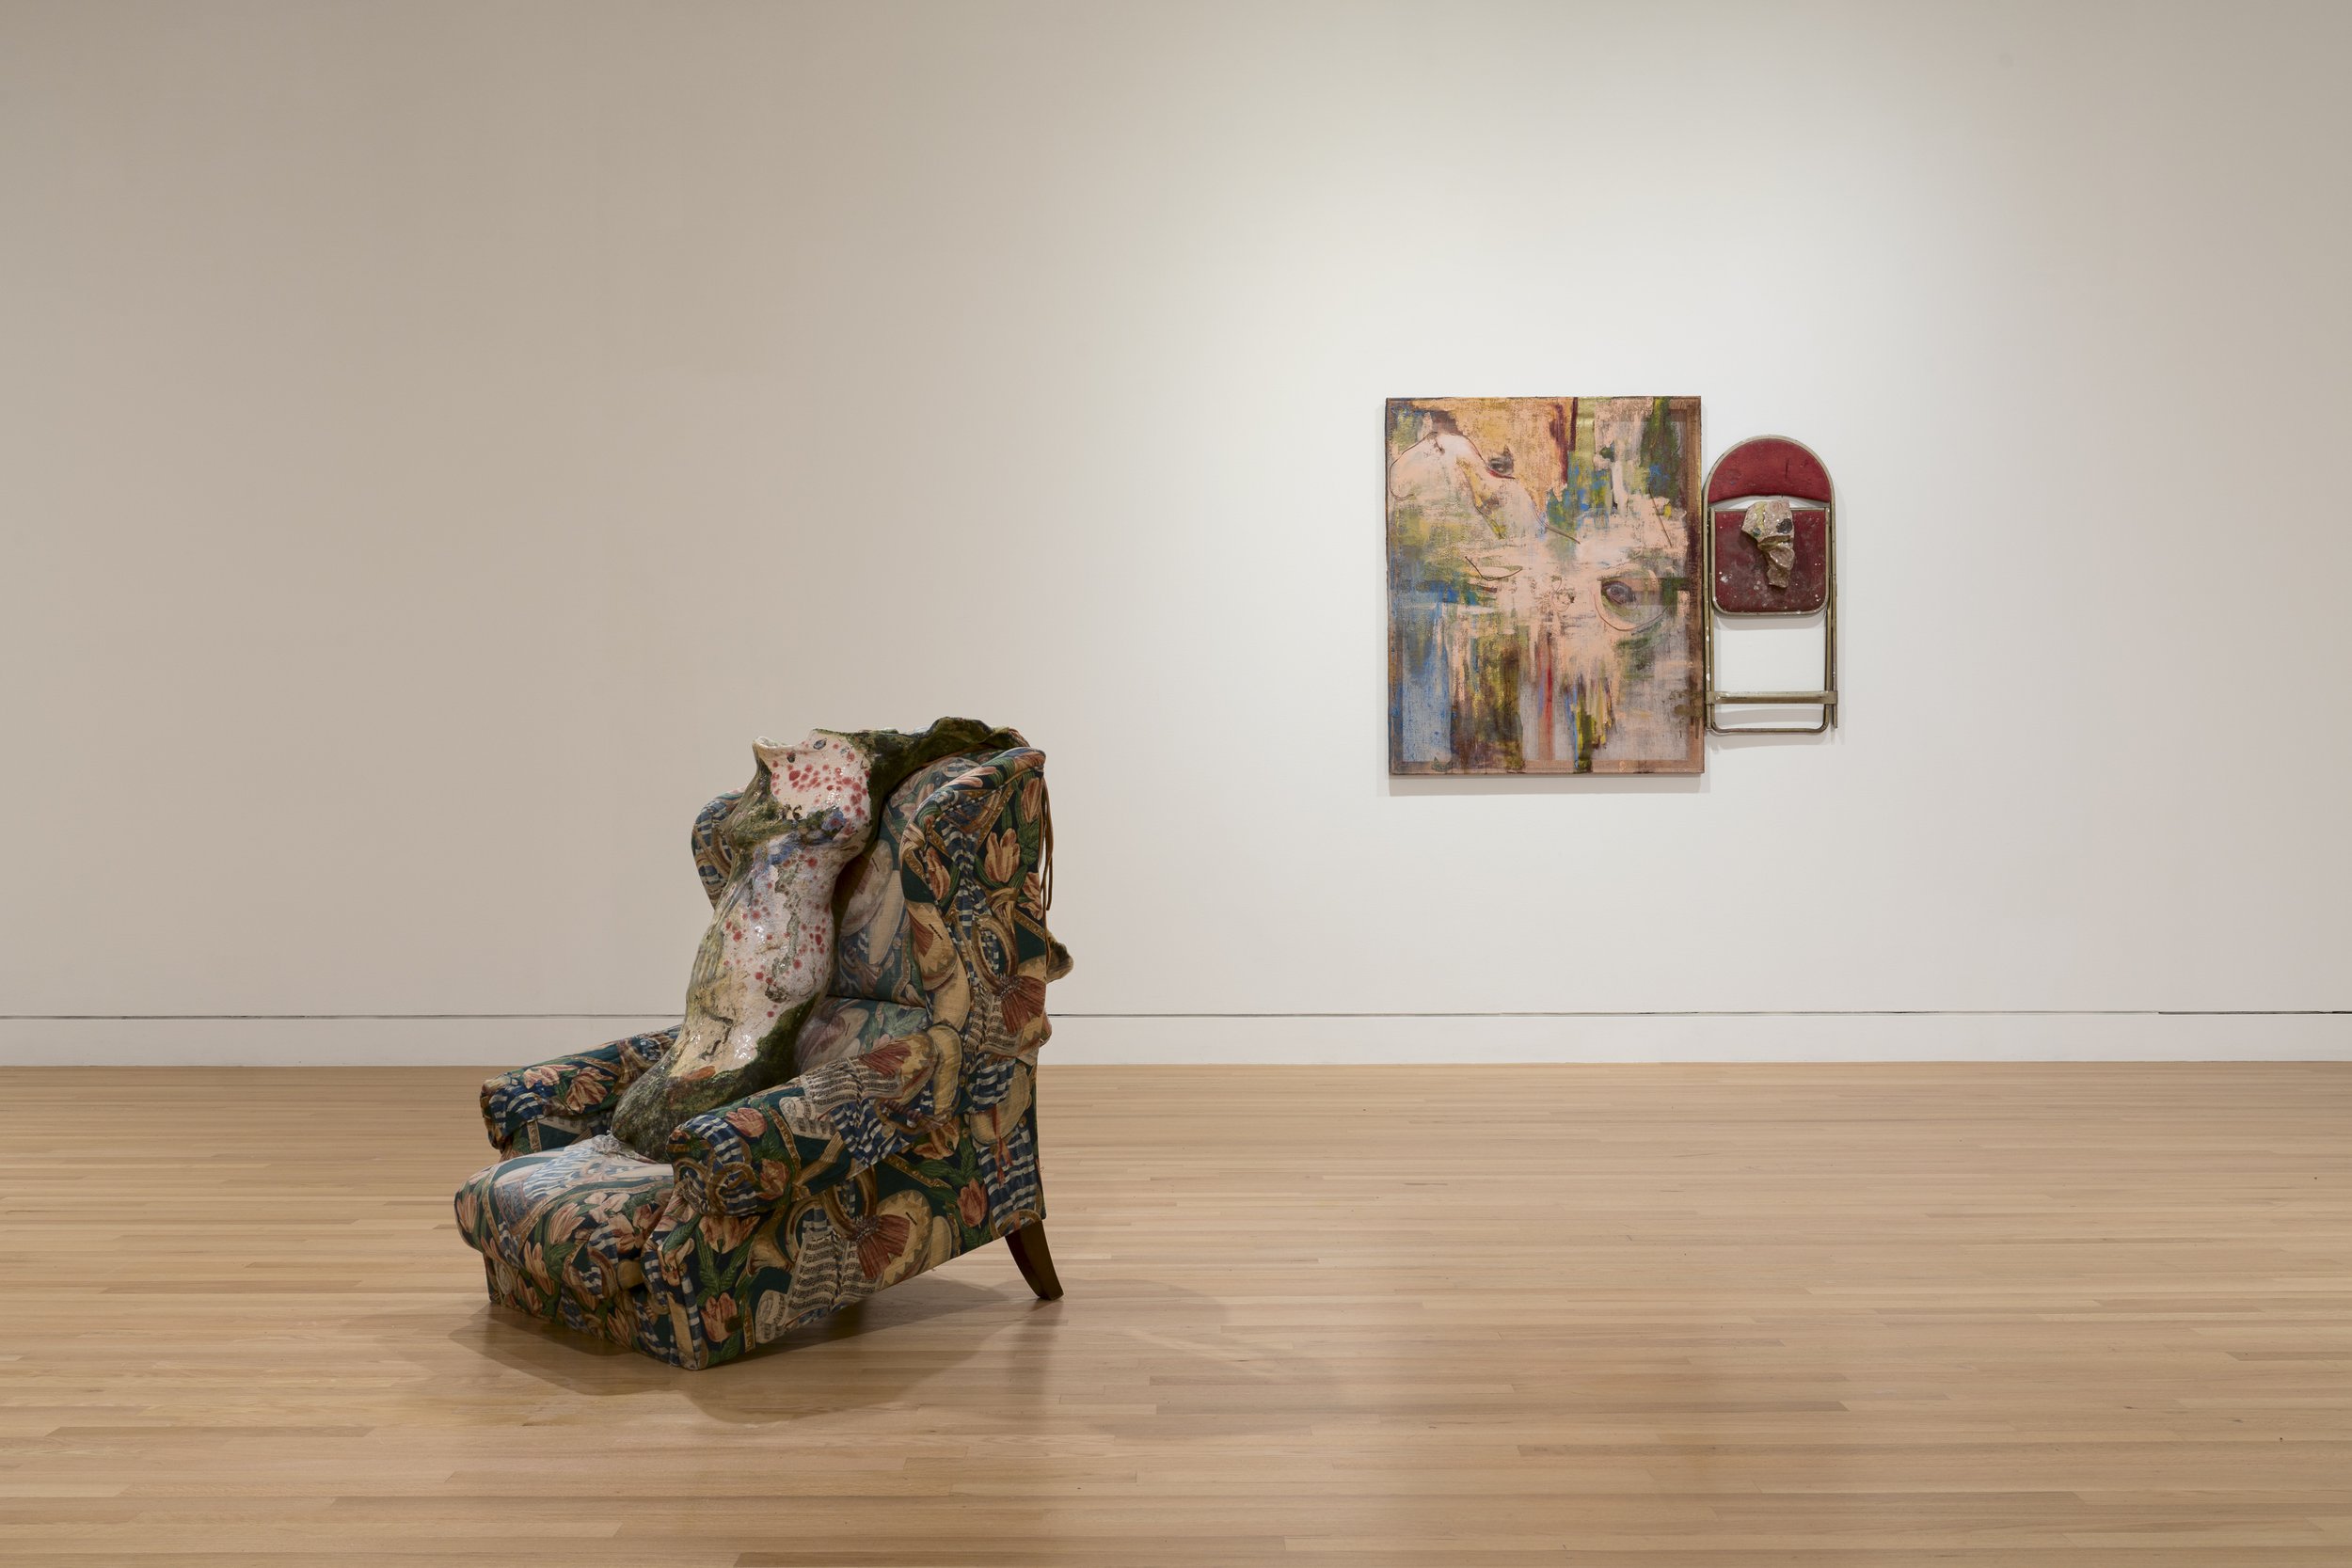  From left: Lascaux Reprise, 2012/2018. Glazed ceramic, upholstered chair, leather, fabric.  45 x 40 x 59 in. Courtesy of the artist and Adams and Ollman, Portland. Third Eye, 2015. Acrylic paint, collage,  fabric, ceramic, chair. 56 x 47 1/2 x 6 in.